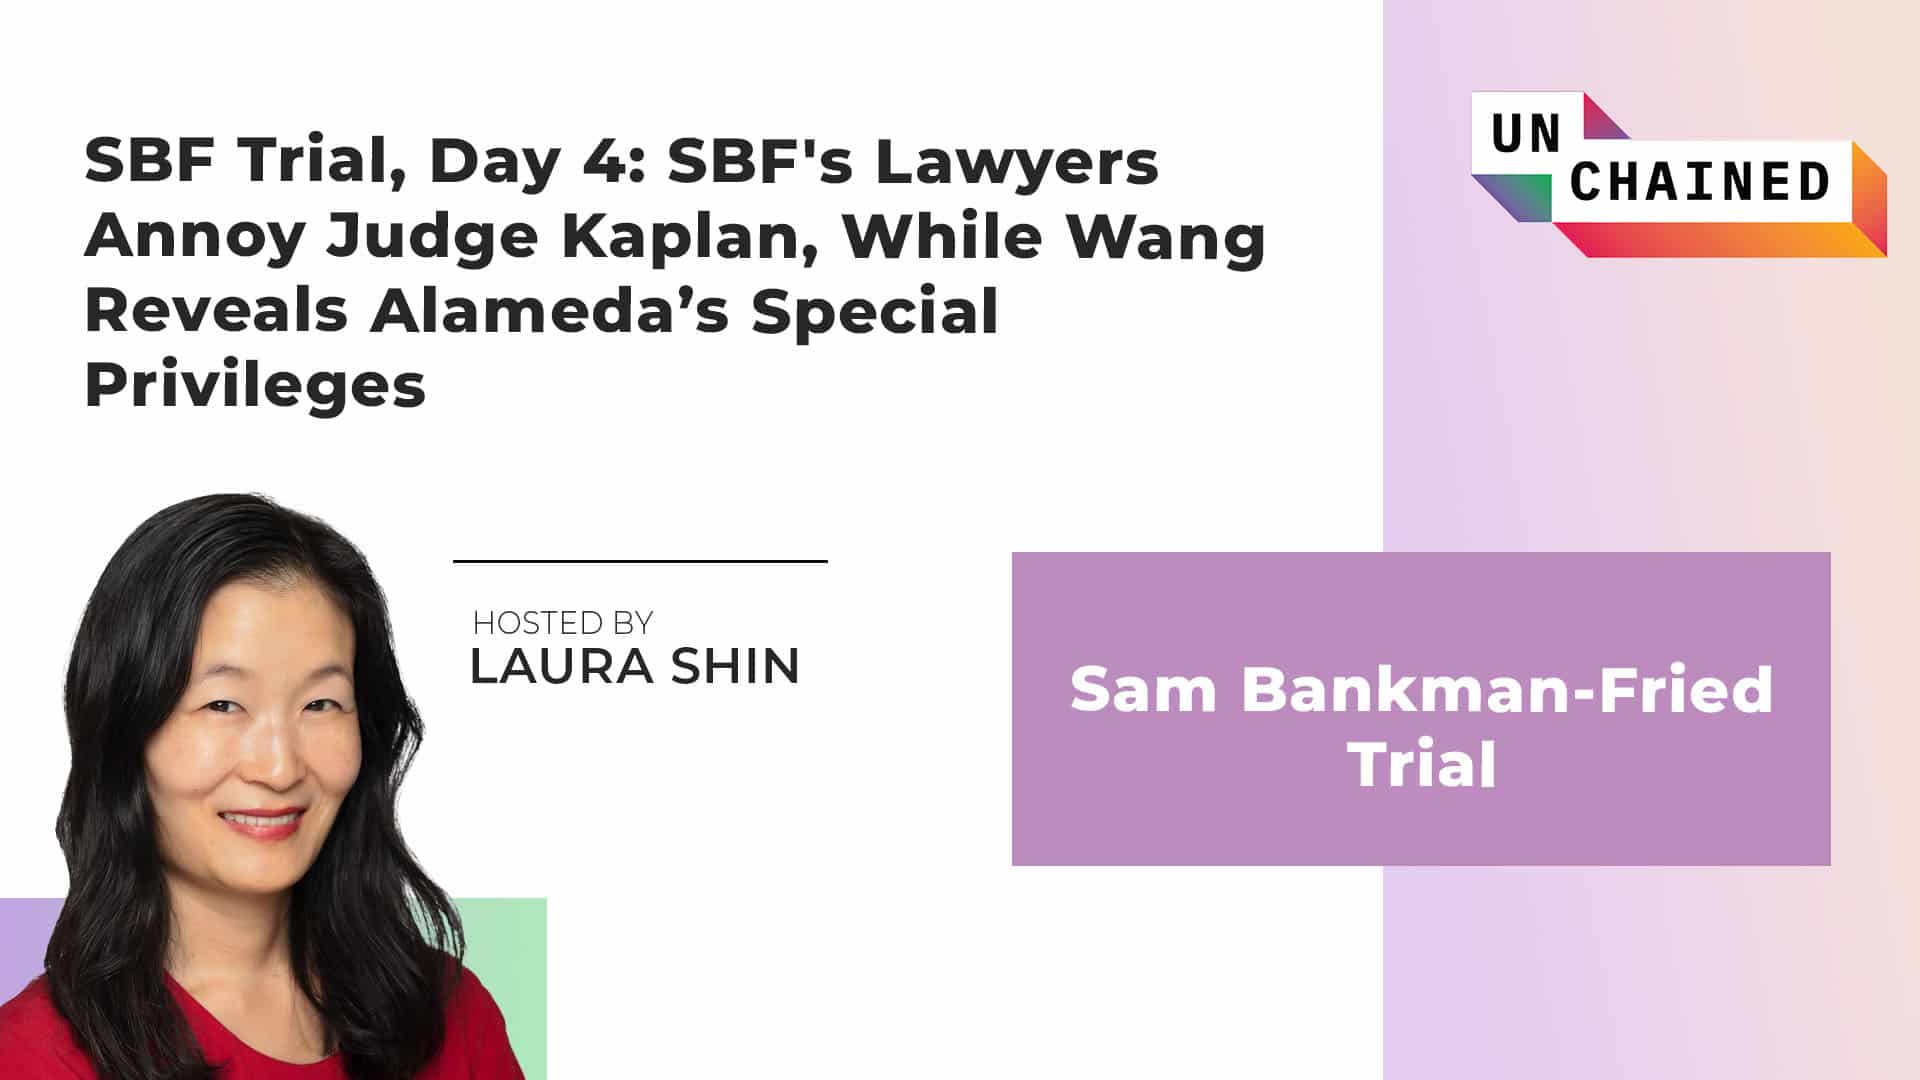 SBF Trial, Day 4: SBF's Lawyers Annoy Judge Kaplan, While Wang Reveals Alameda’s Special Privileges